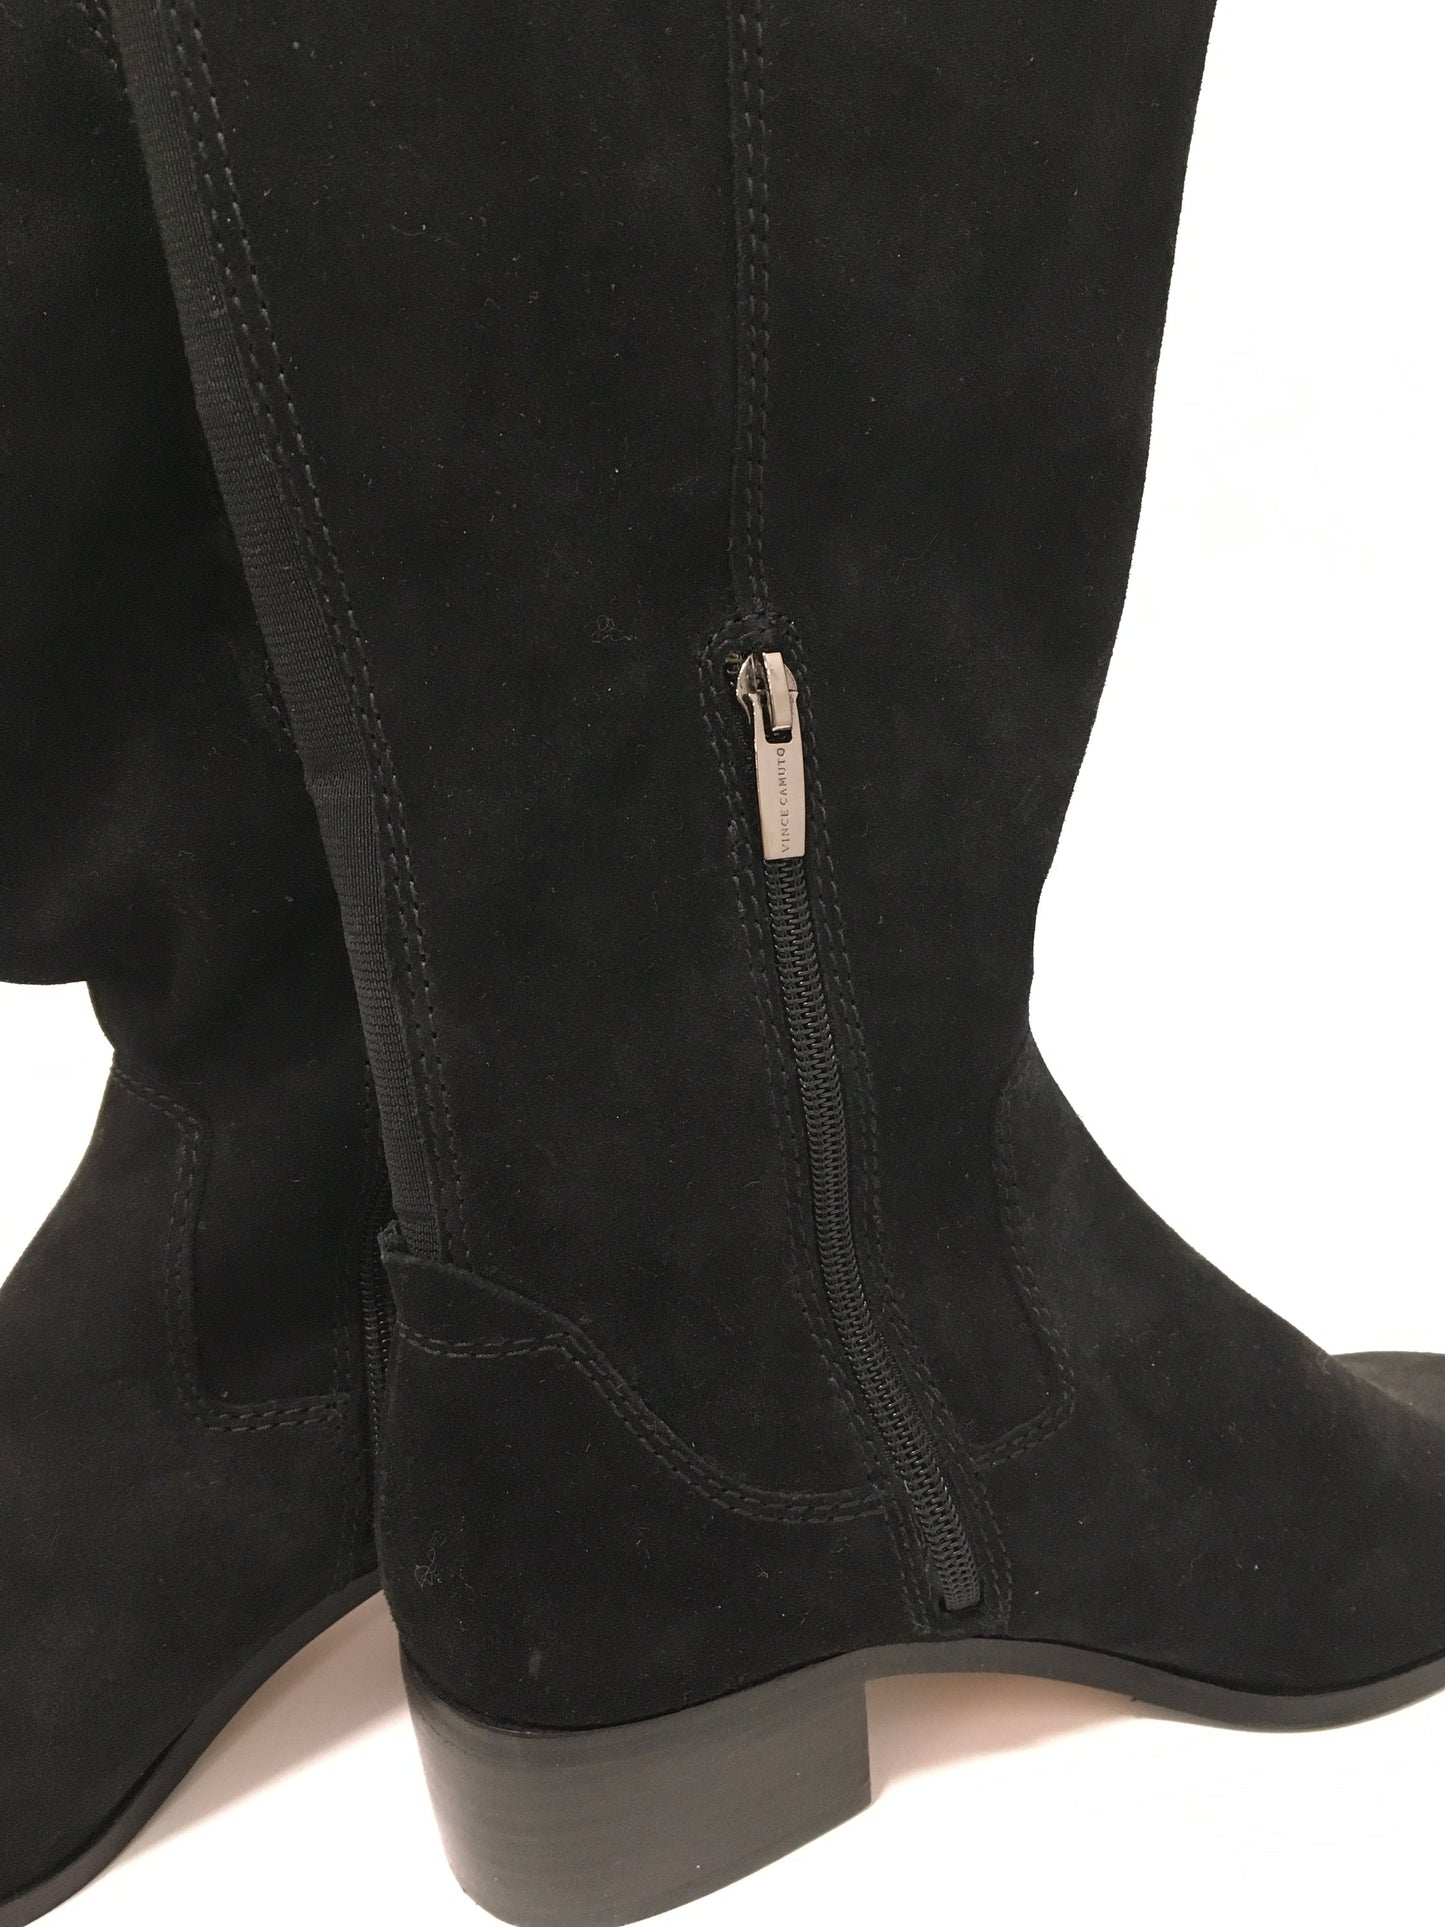 Boots Knee Heels By Vince Camuto  Size: 8.5